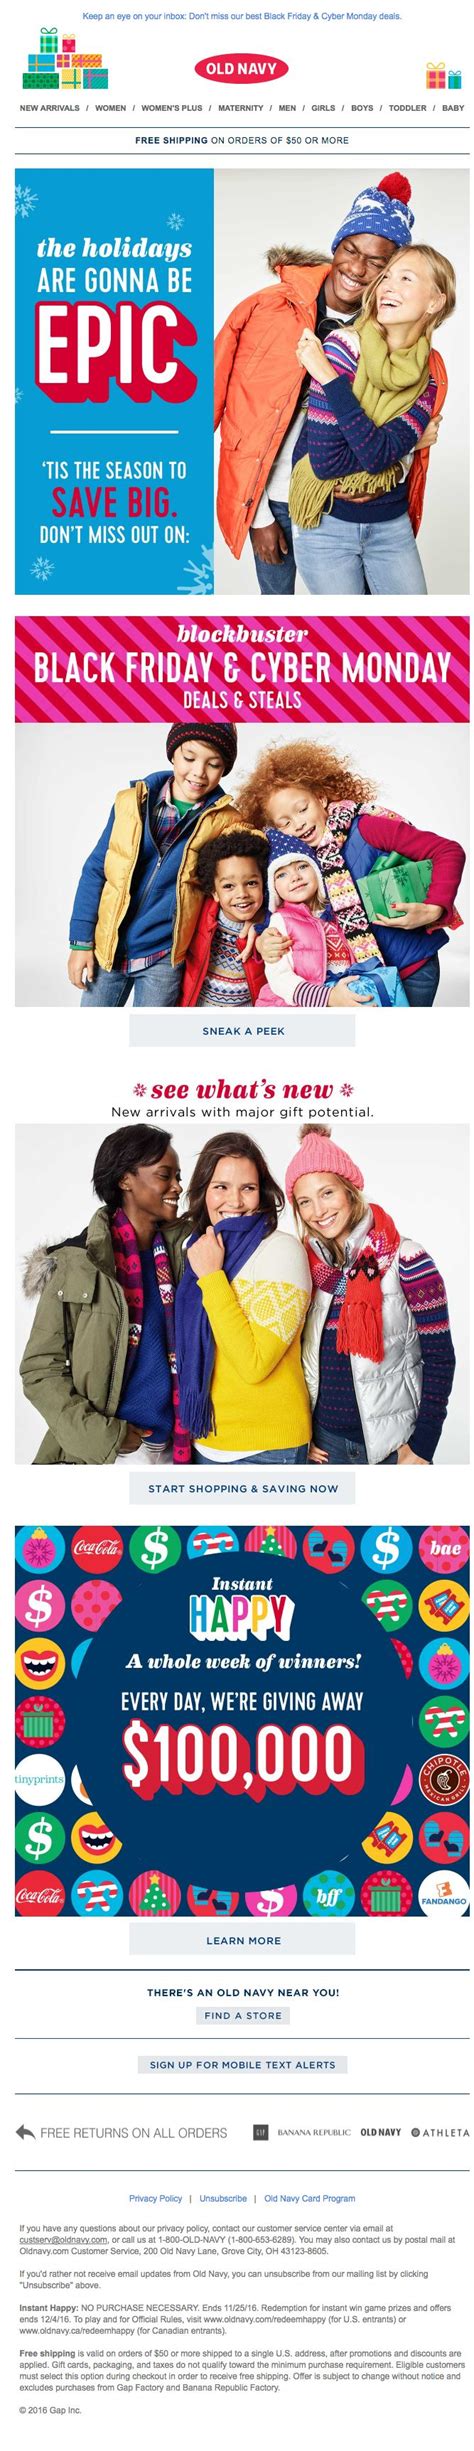 Pin By Rav Norodom On Eblast Whats New Old Navy Cyber Monday